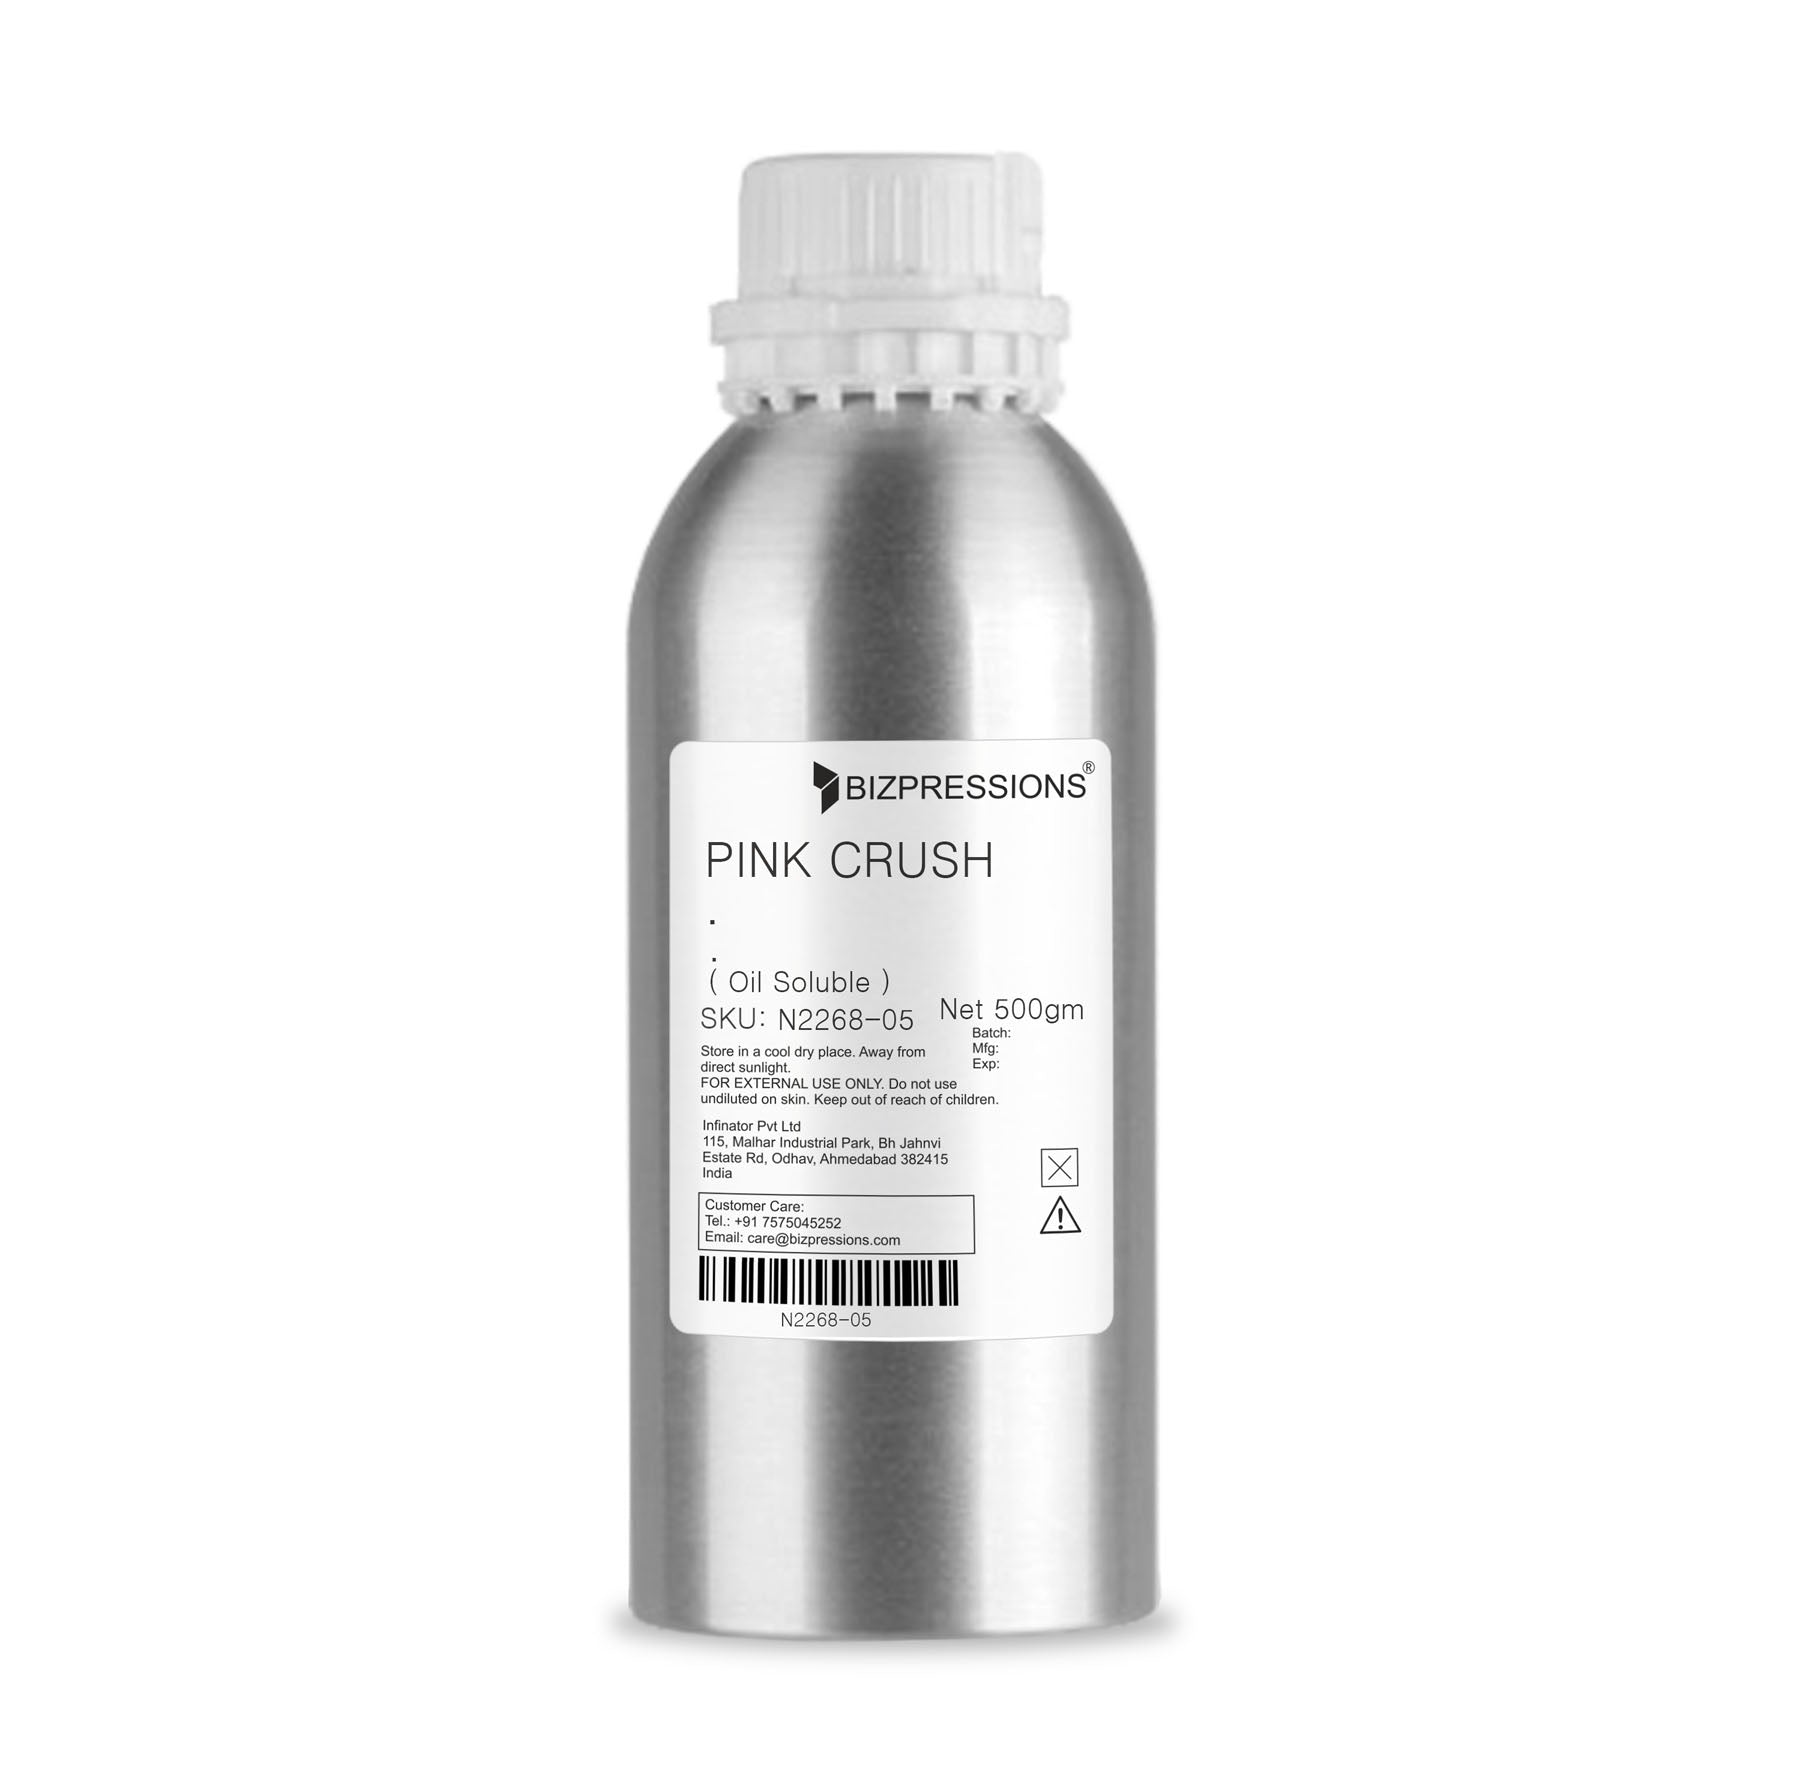 PINK CRUSH - Fragrance ( Oil Soluble ) - 500 gm